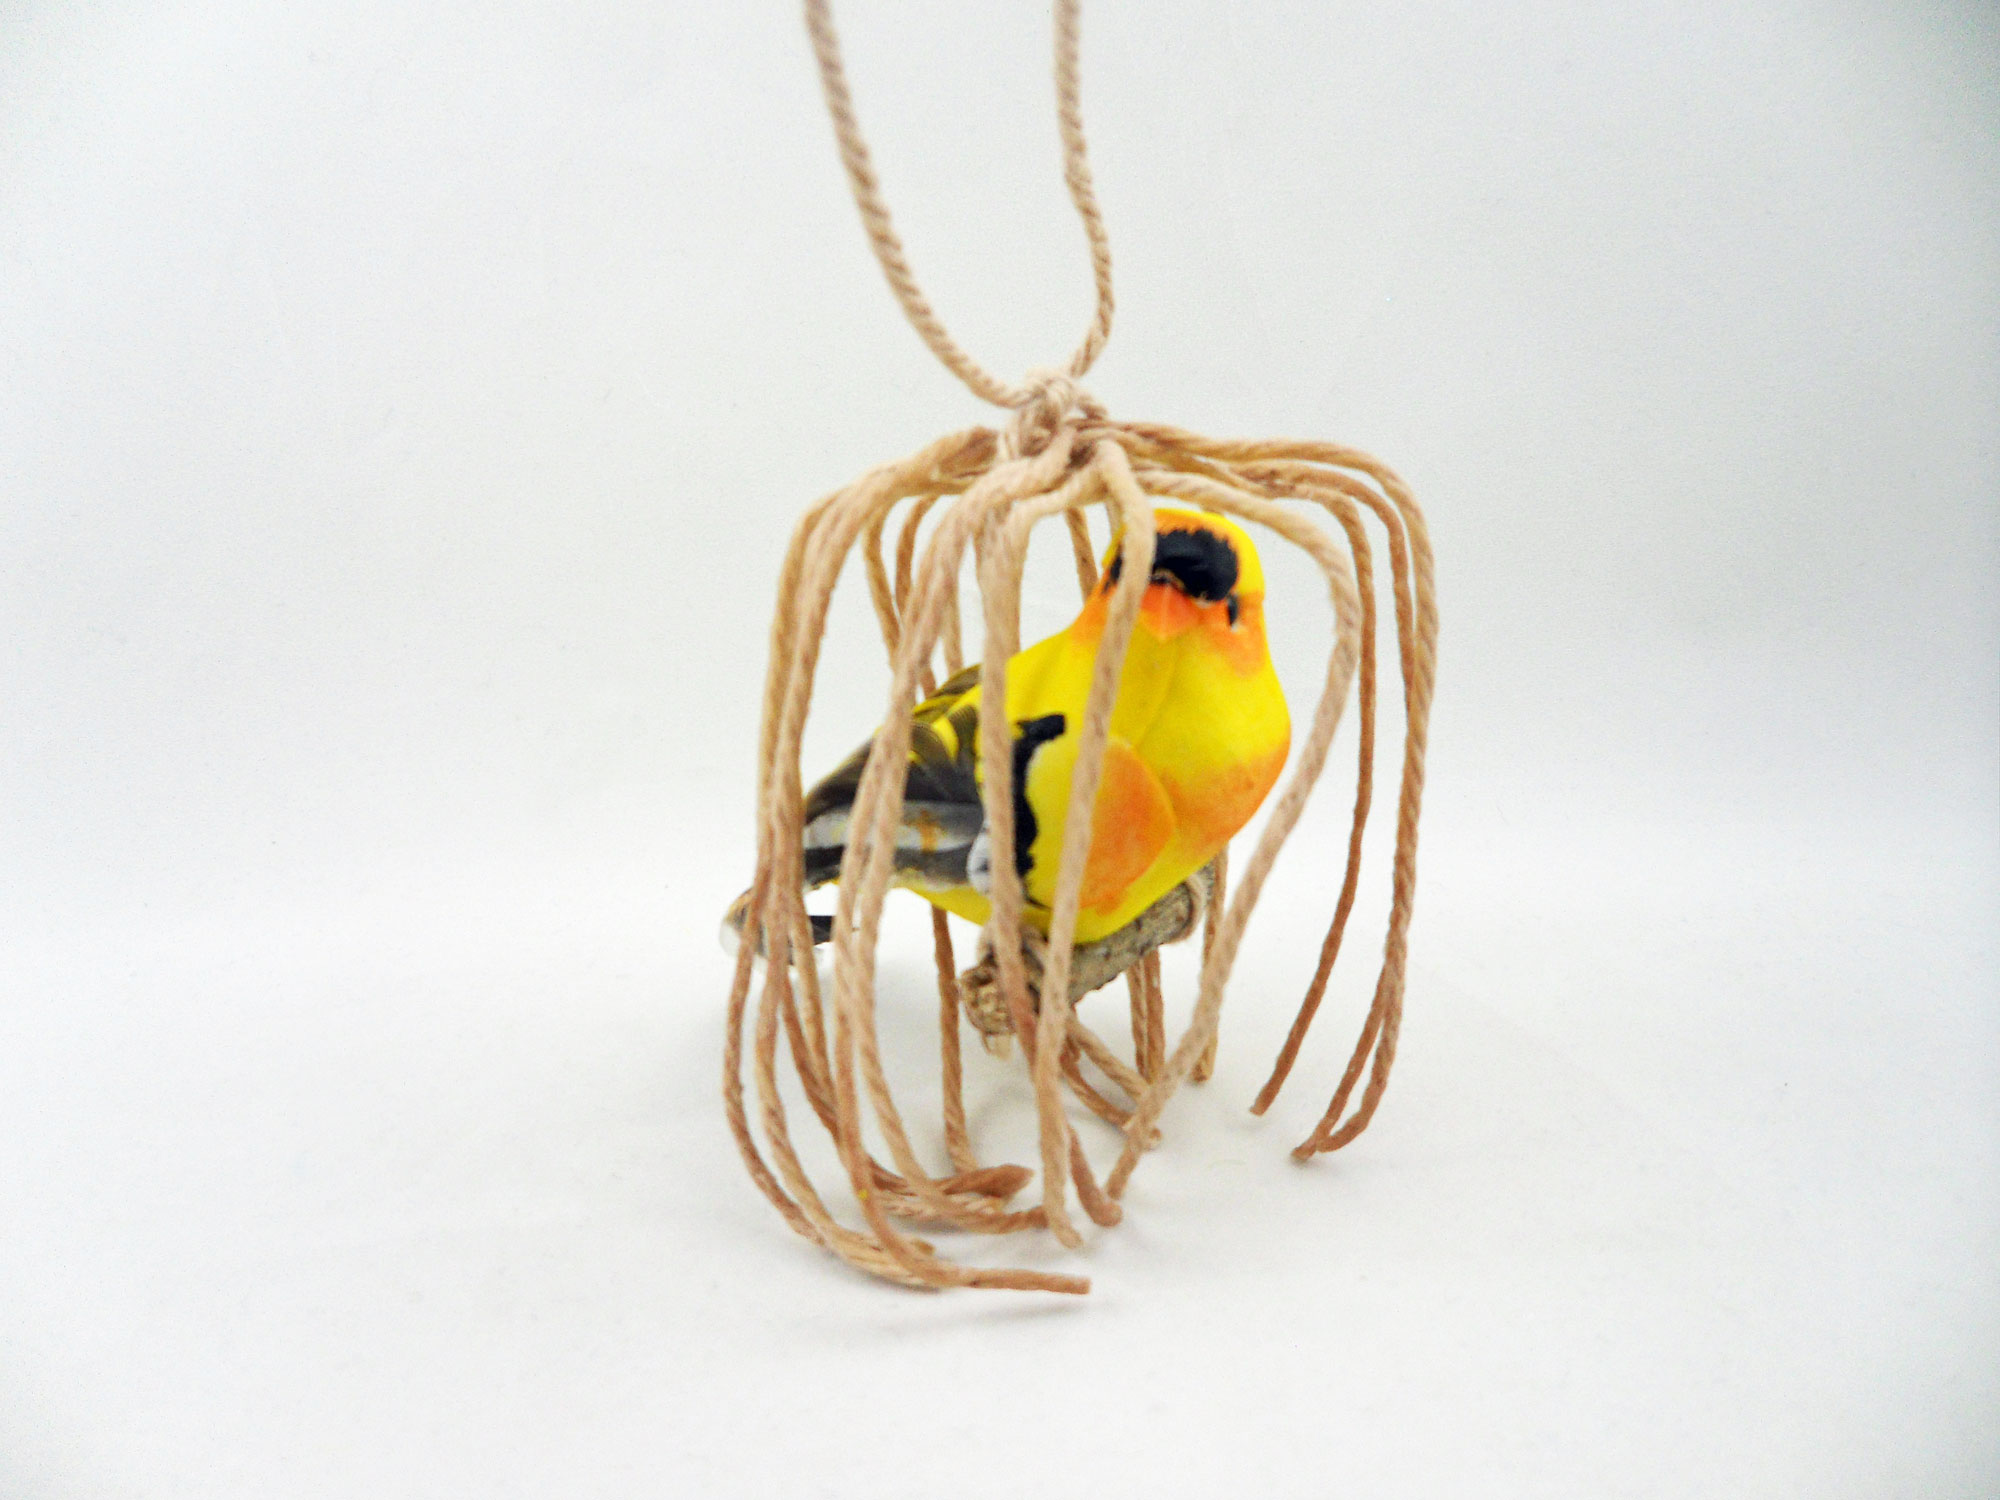 Step 7 is to tie the top of the perch to the cage | OrnamentShop.com